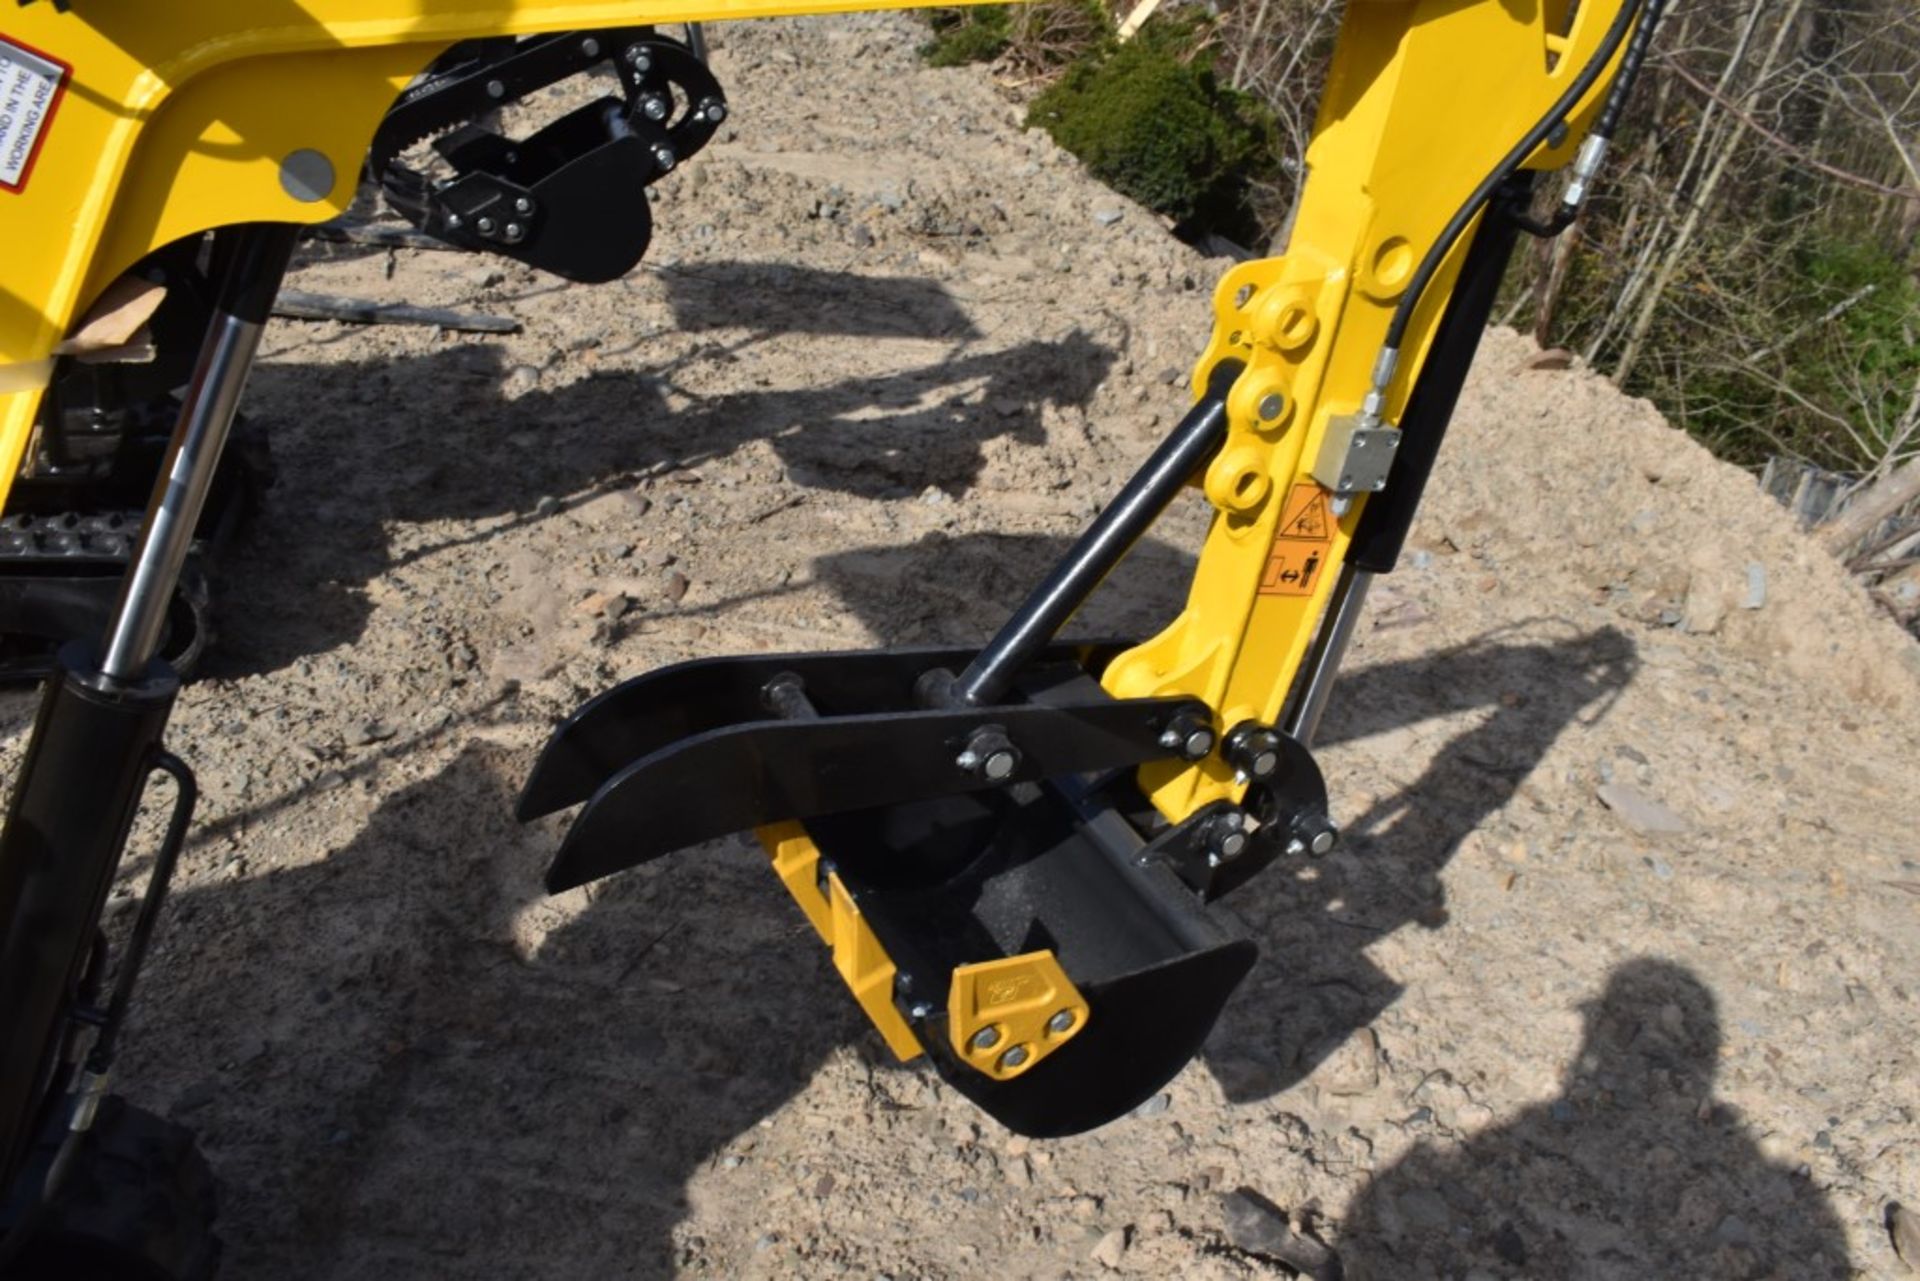 AGT Industrial KAT12R Mini Excavator Be Sure to Check Fluids, New, 16" Bucket, Auxiliary Hydraulics, - Image 9 of 12